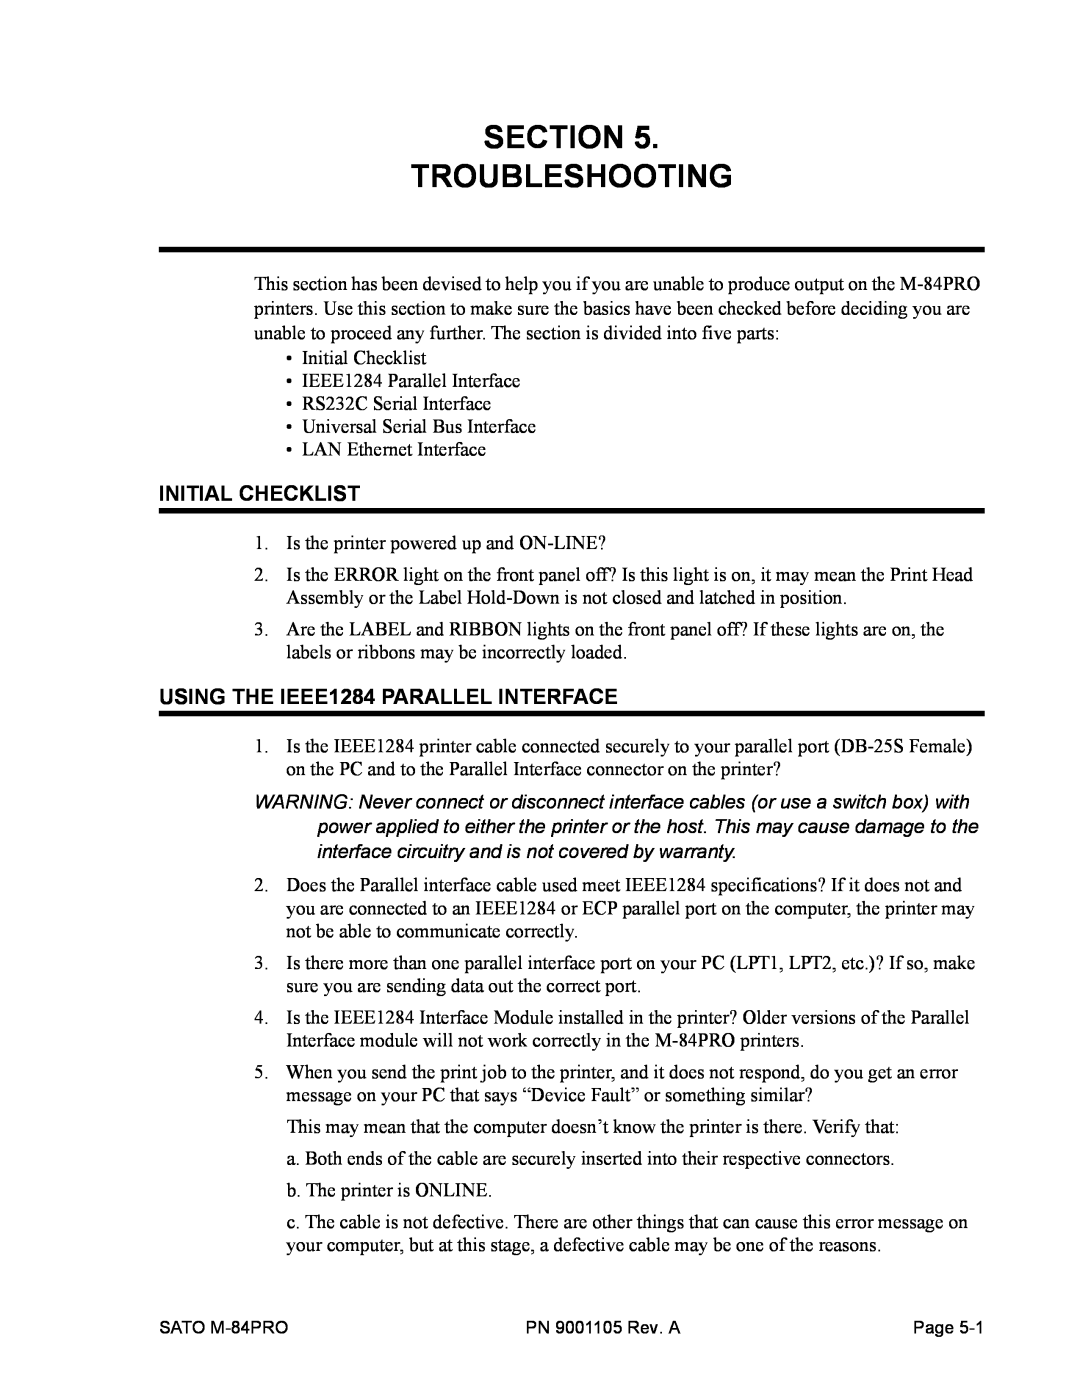 SATO M-84PRO manual Section Troubleshooting, Initial Checklist, USING THE IEEE1284 PARALLEL INTERFACE 